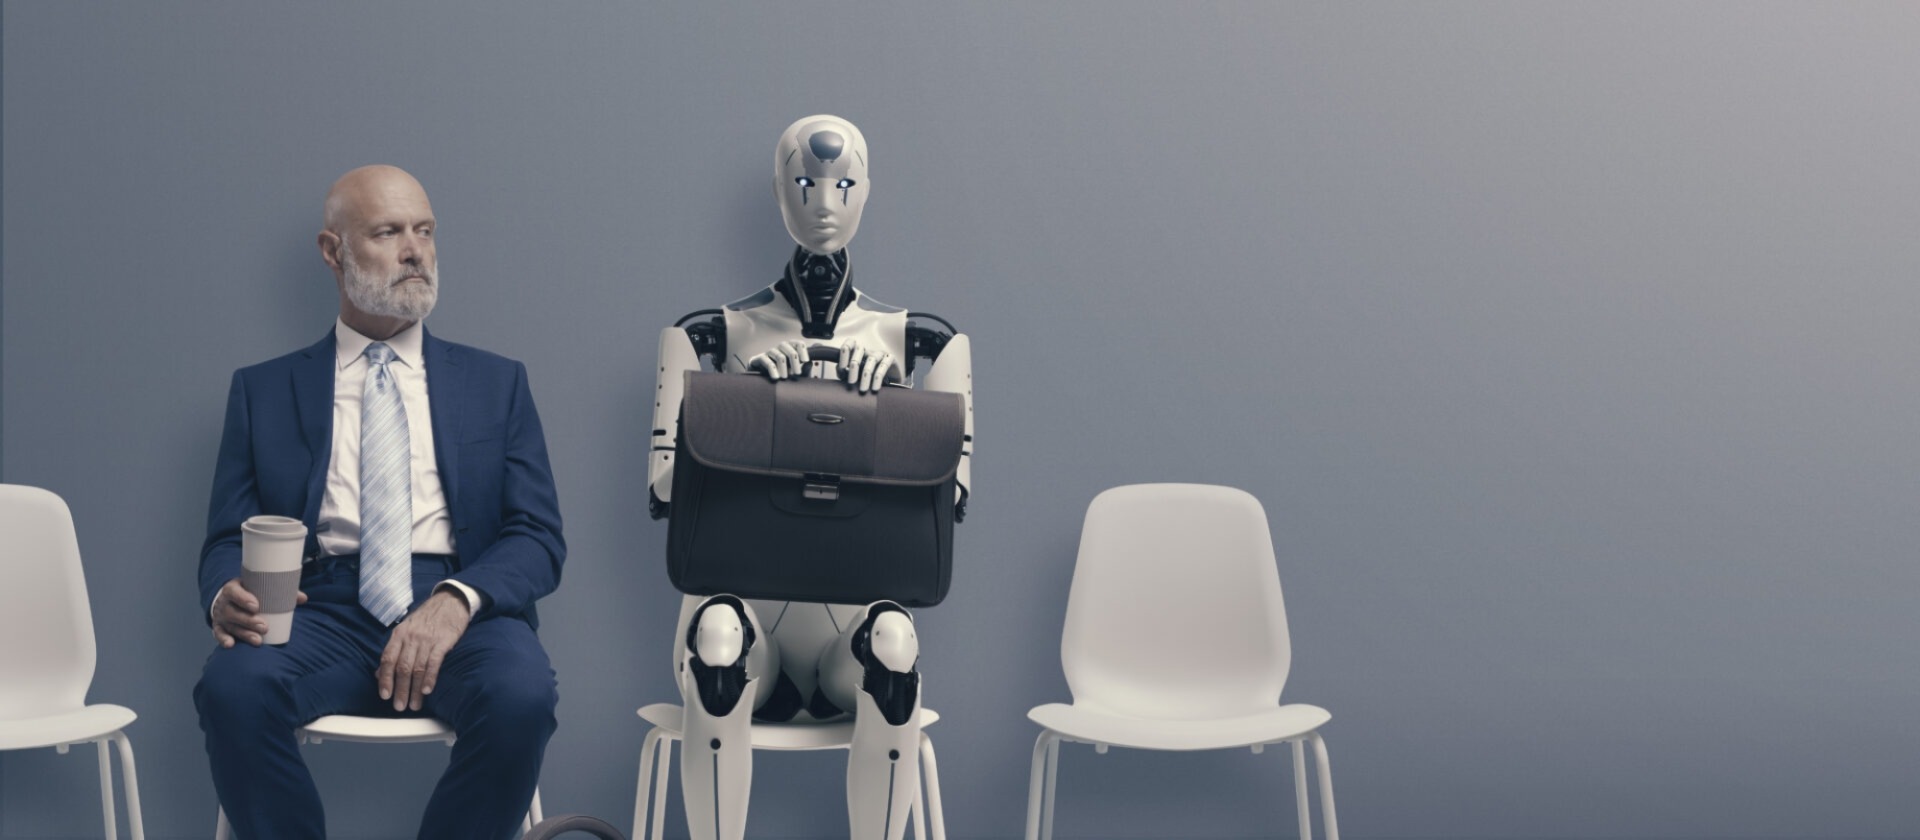 7 Ways To Build Employee Trust in an AI-Driven Workplace